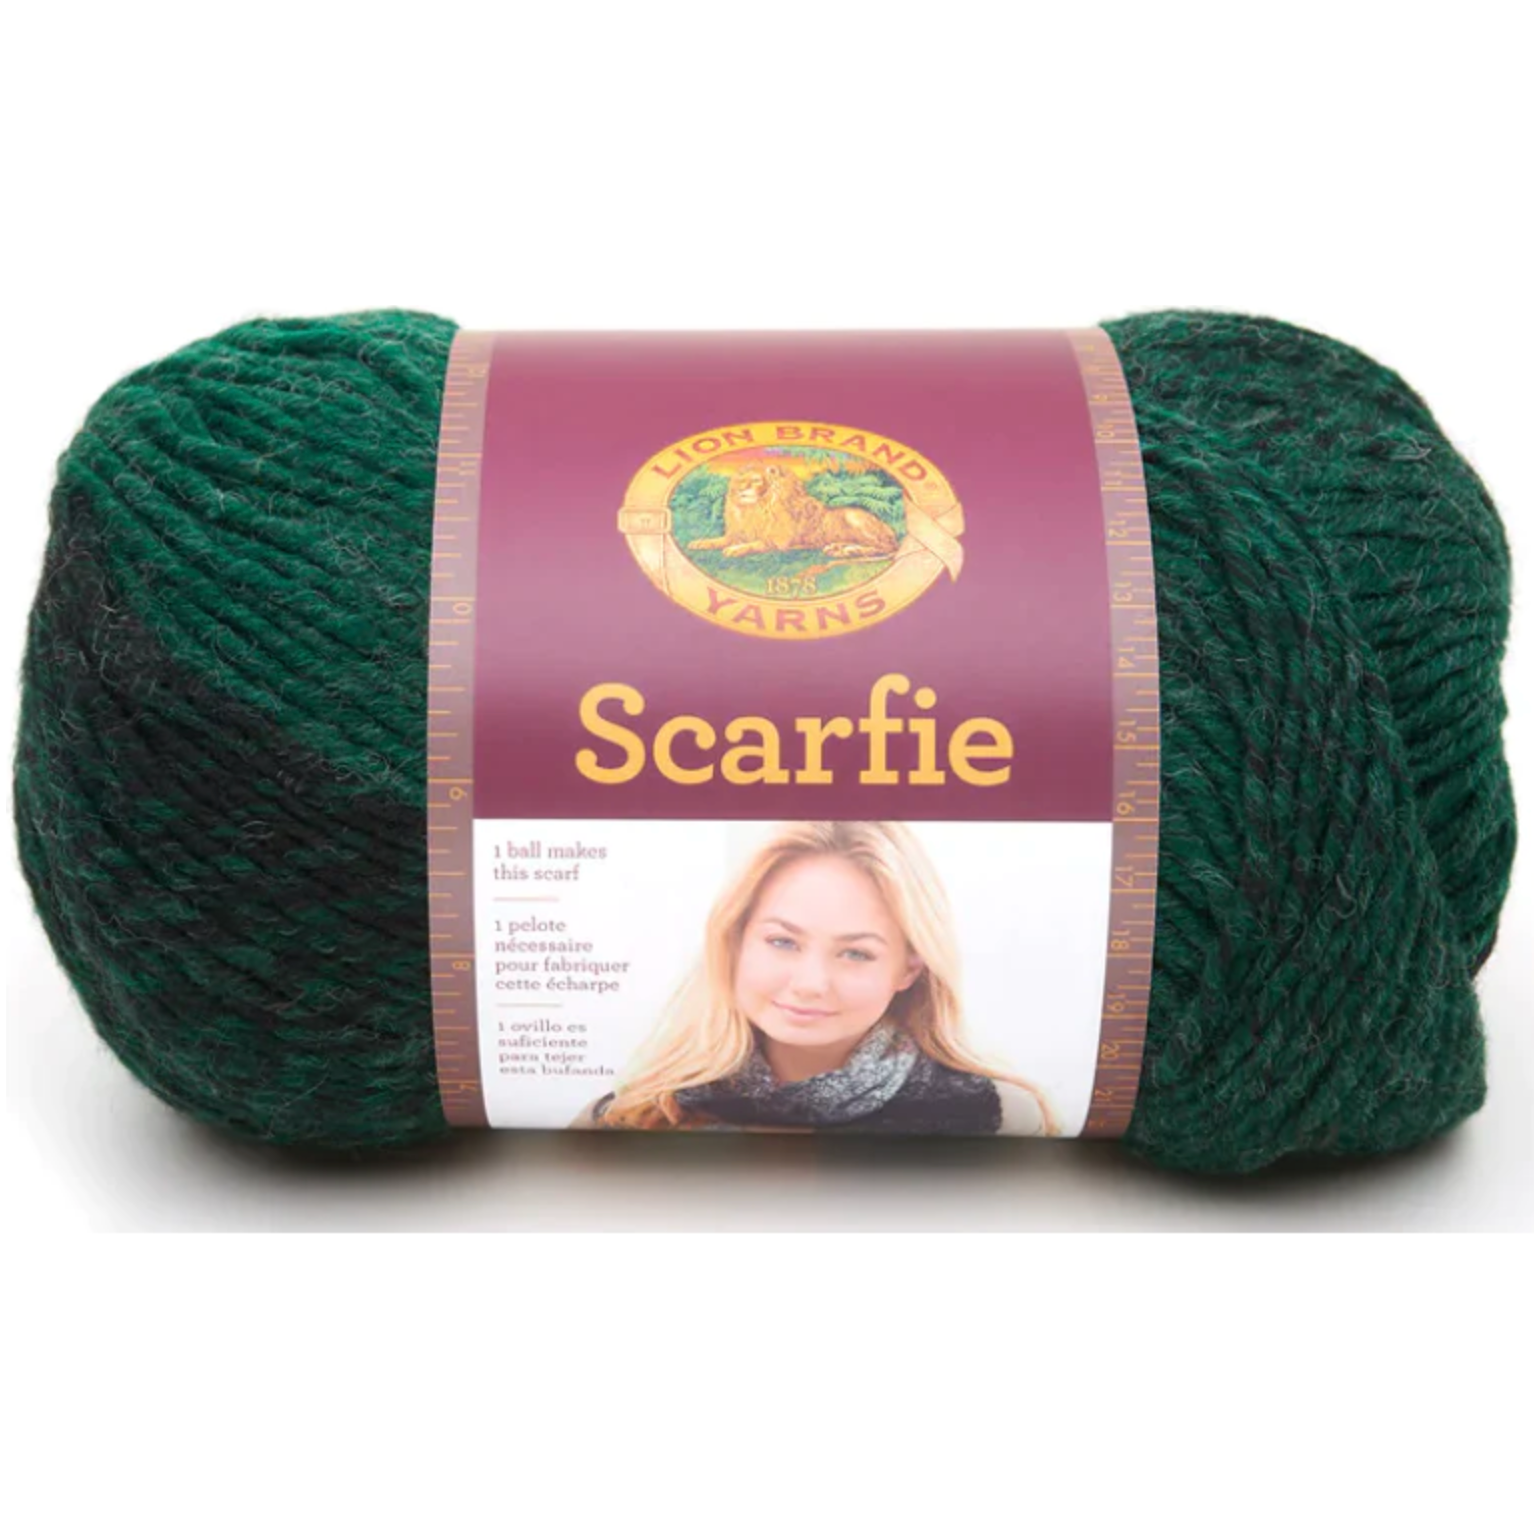 Discounted Lion Brand Scarfie Yarn Very Limted Stock